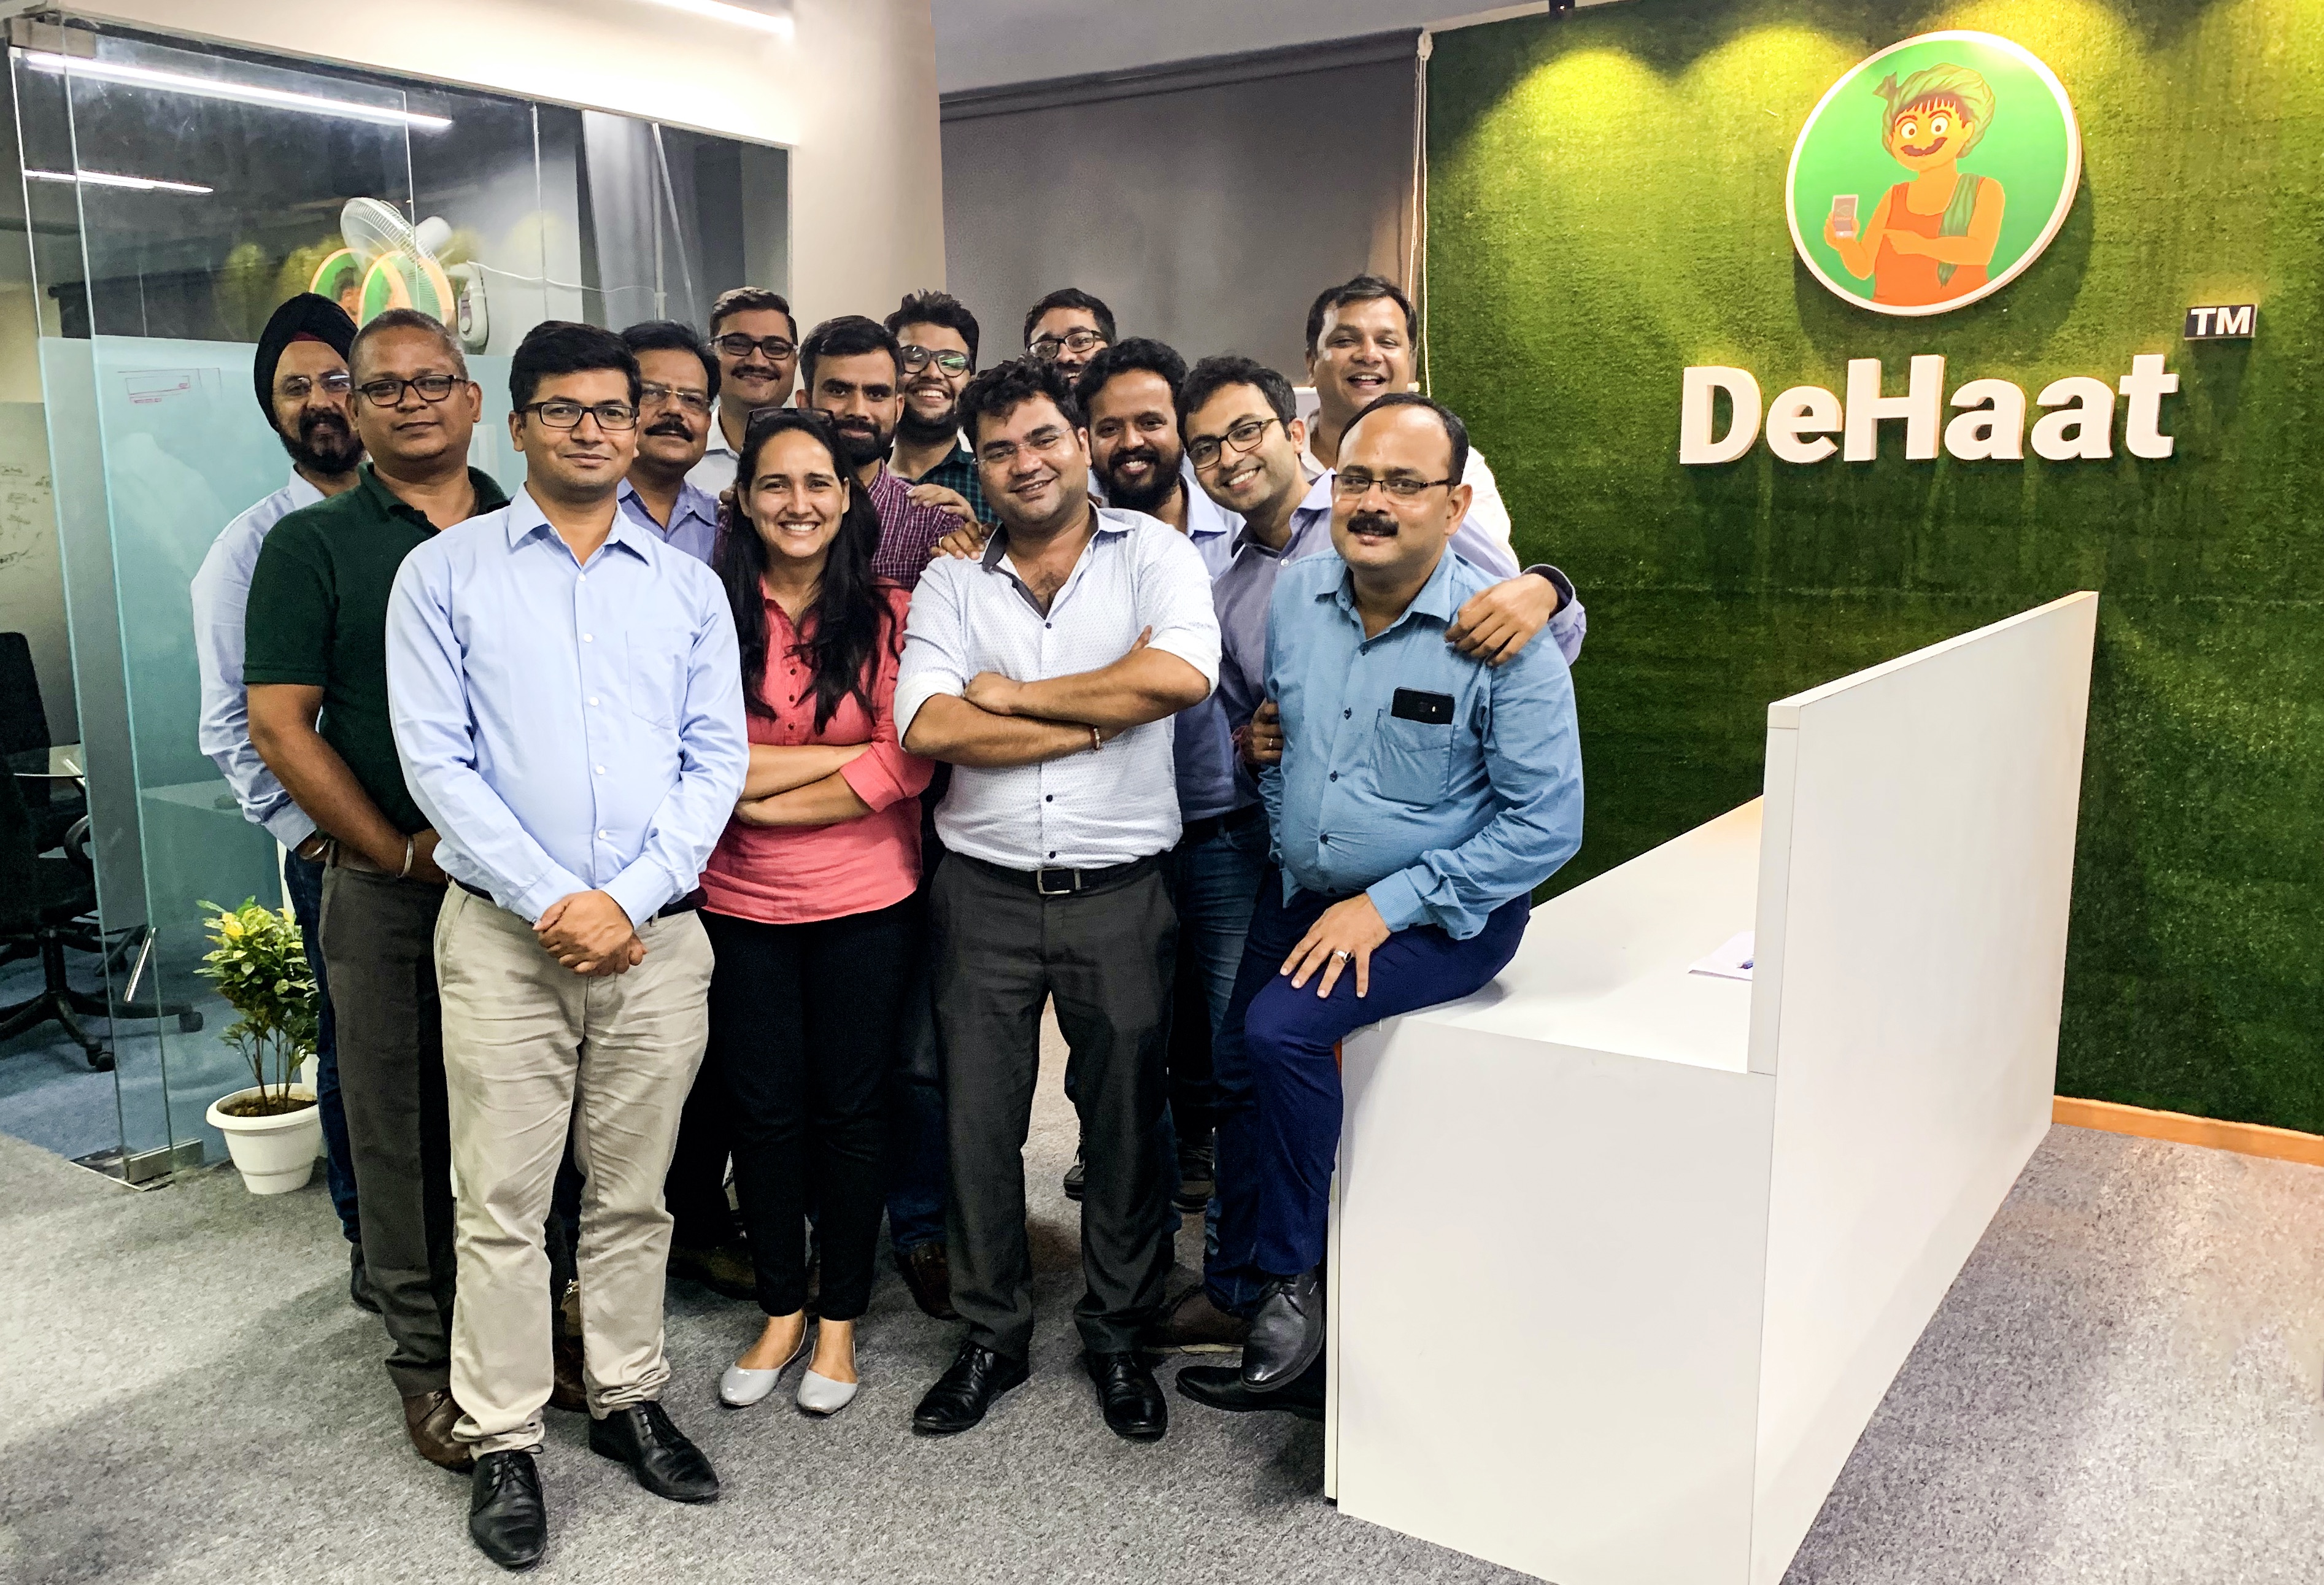 Agritech startup DeHaat raises $12M to reach more farmers in India